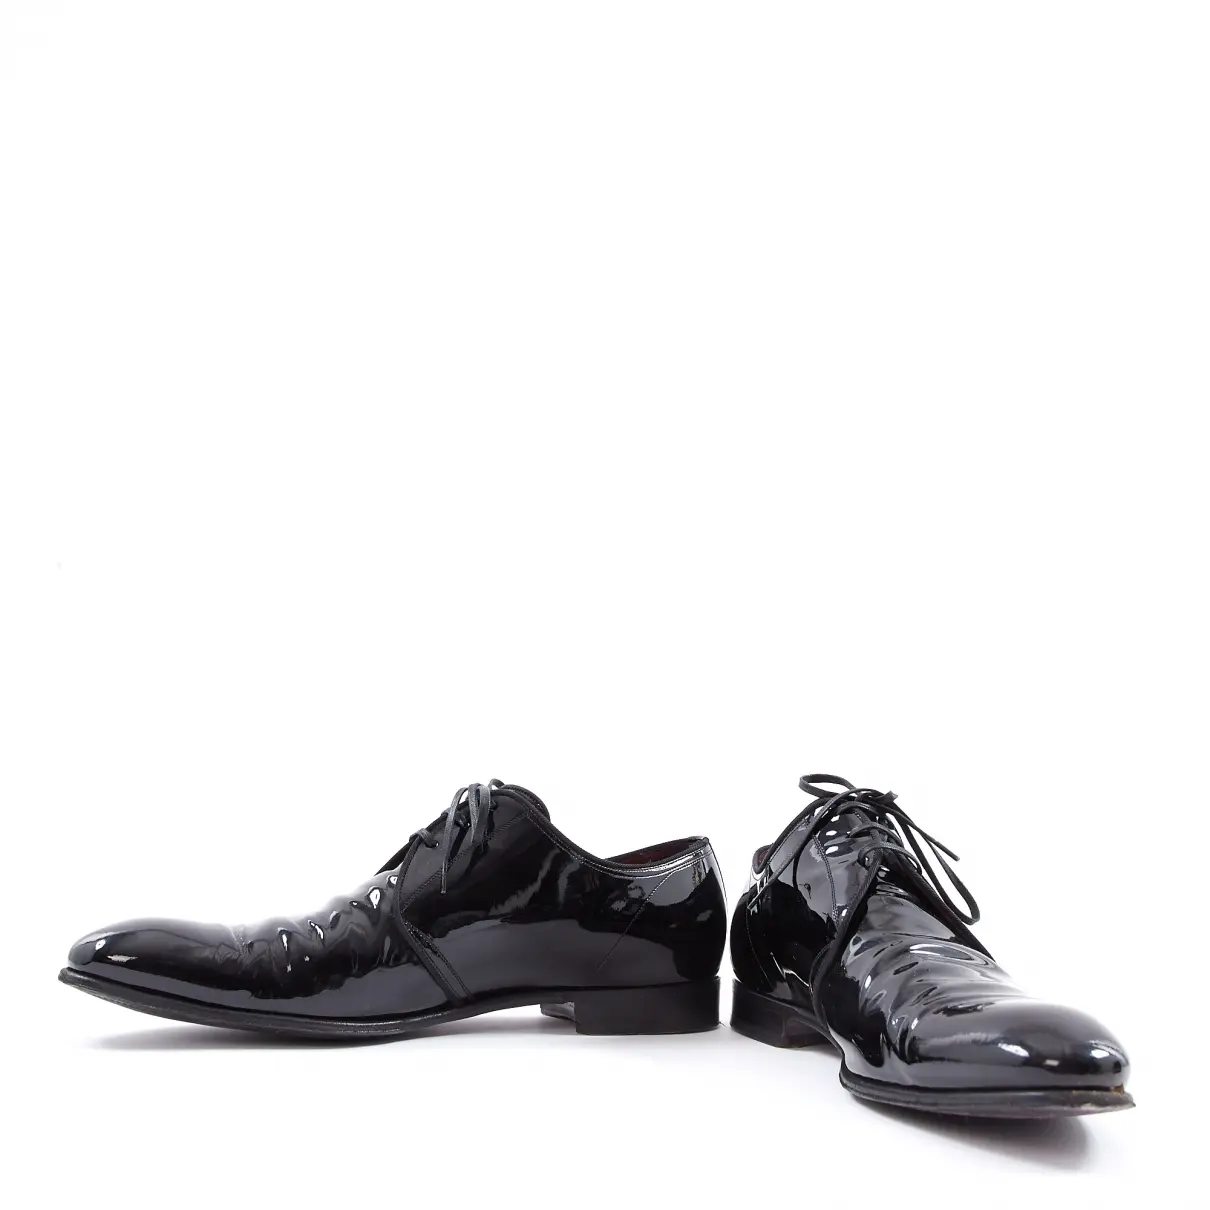 Dolce & Gabbana Patent leather lace ups for sale